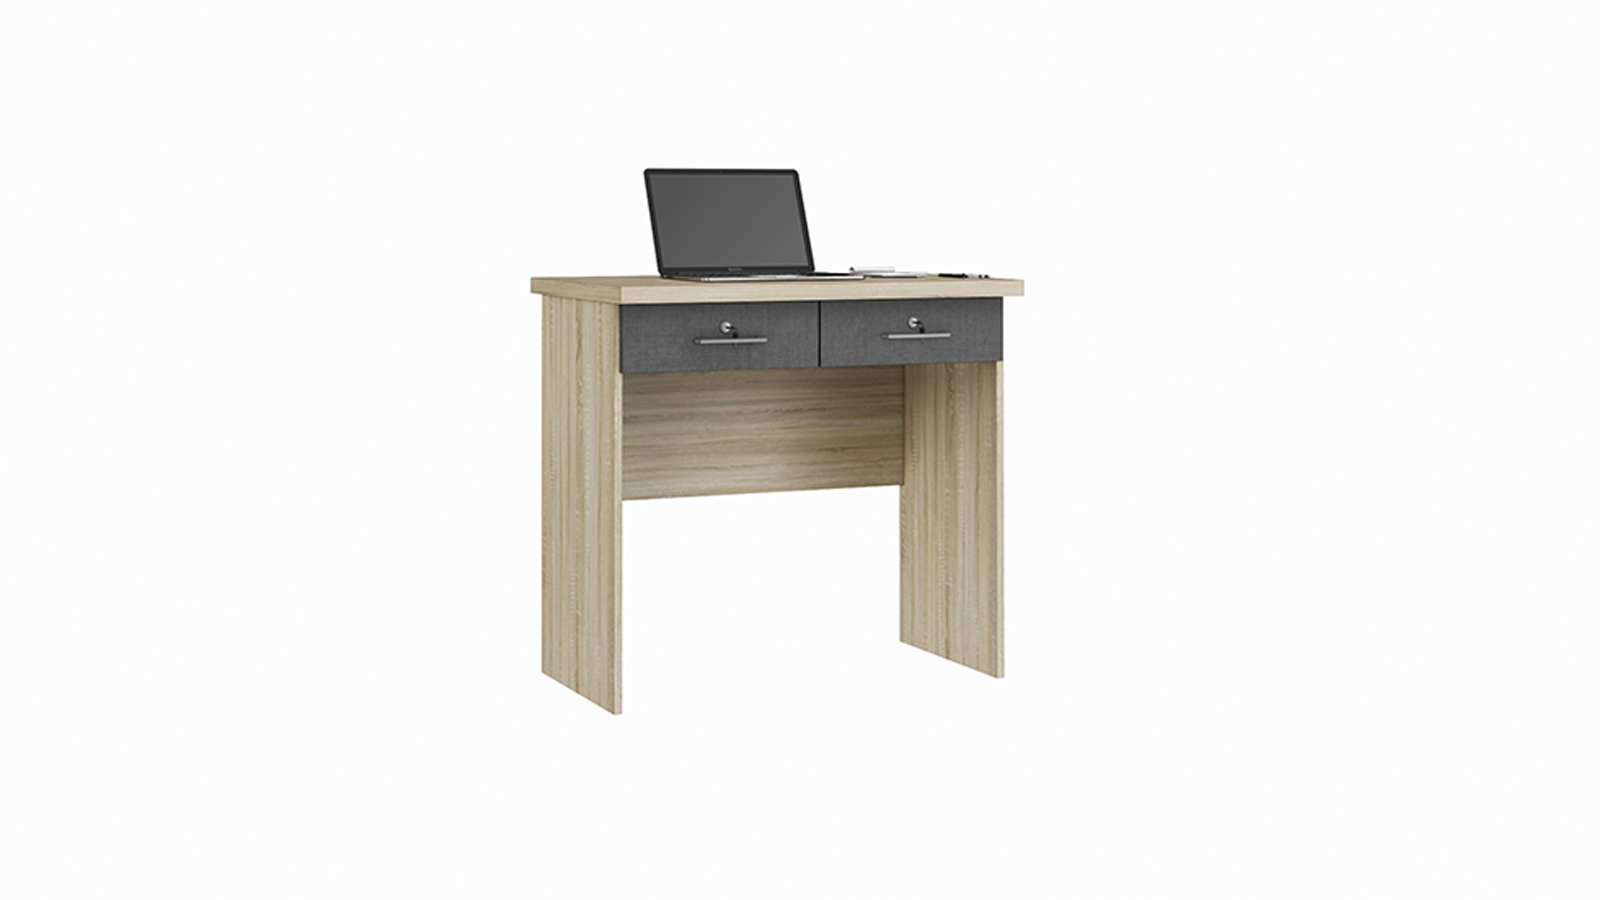 Raffin Working Table